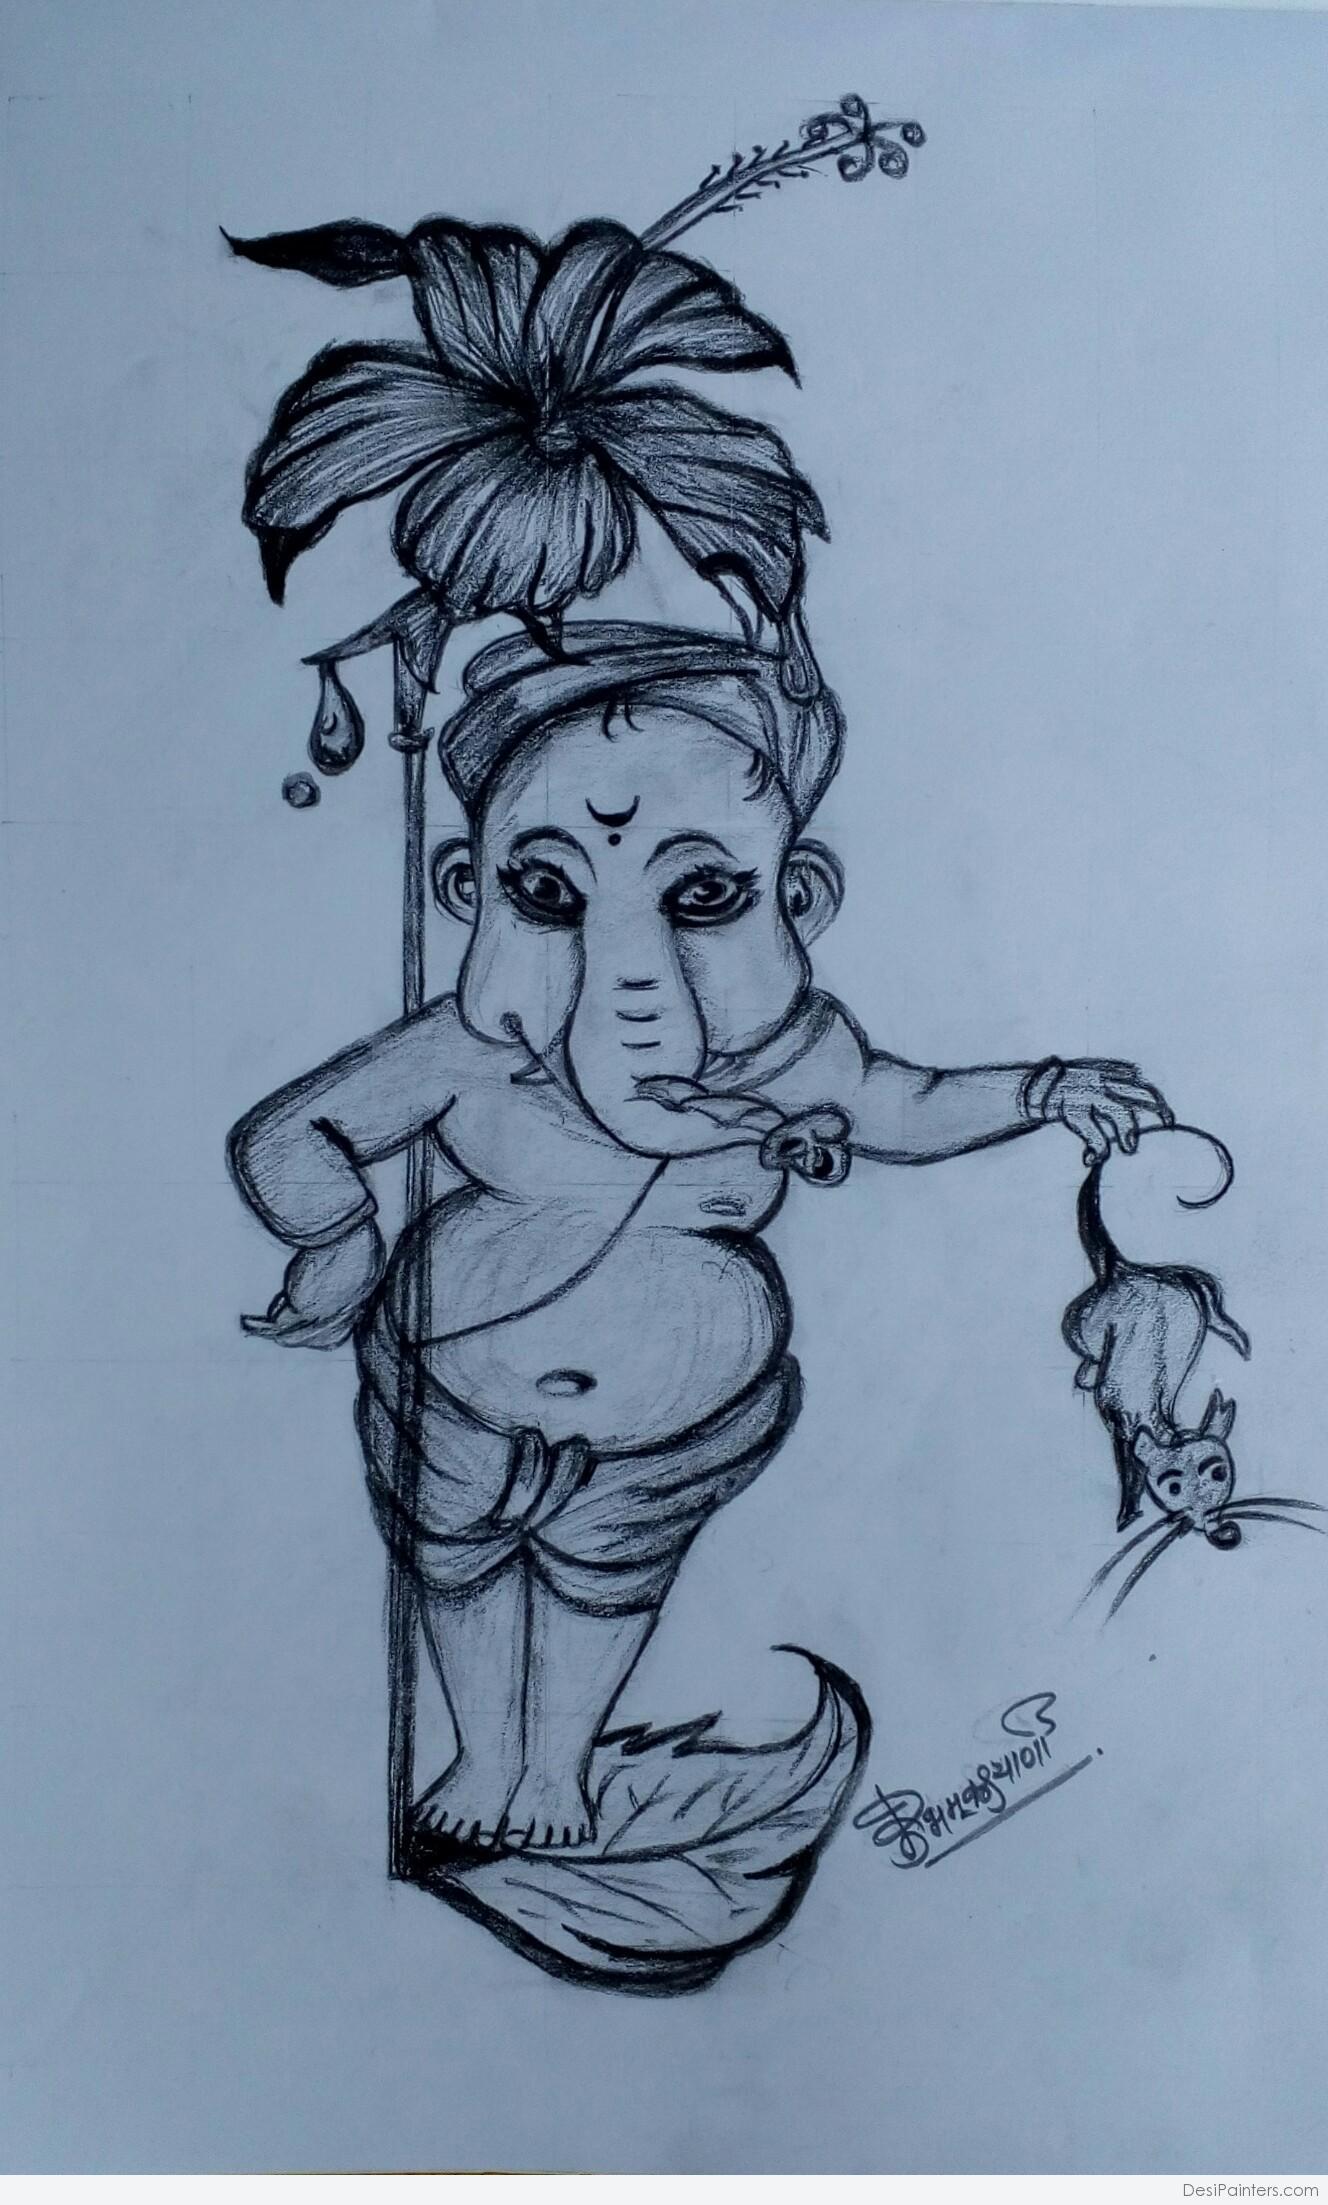 Paintings By Shubham Kalyani Choose your favorite ganpati paintings from millions of available designs. paintings by shubham kalyani